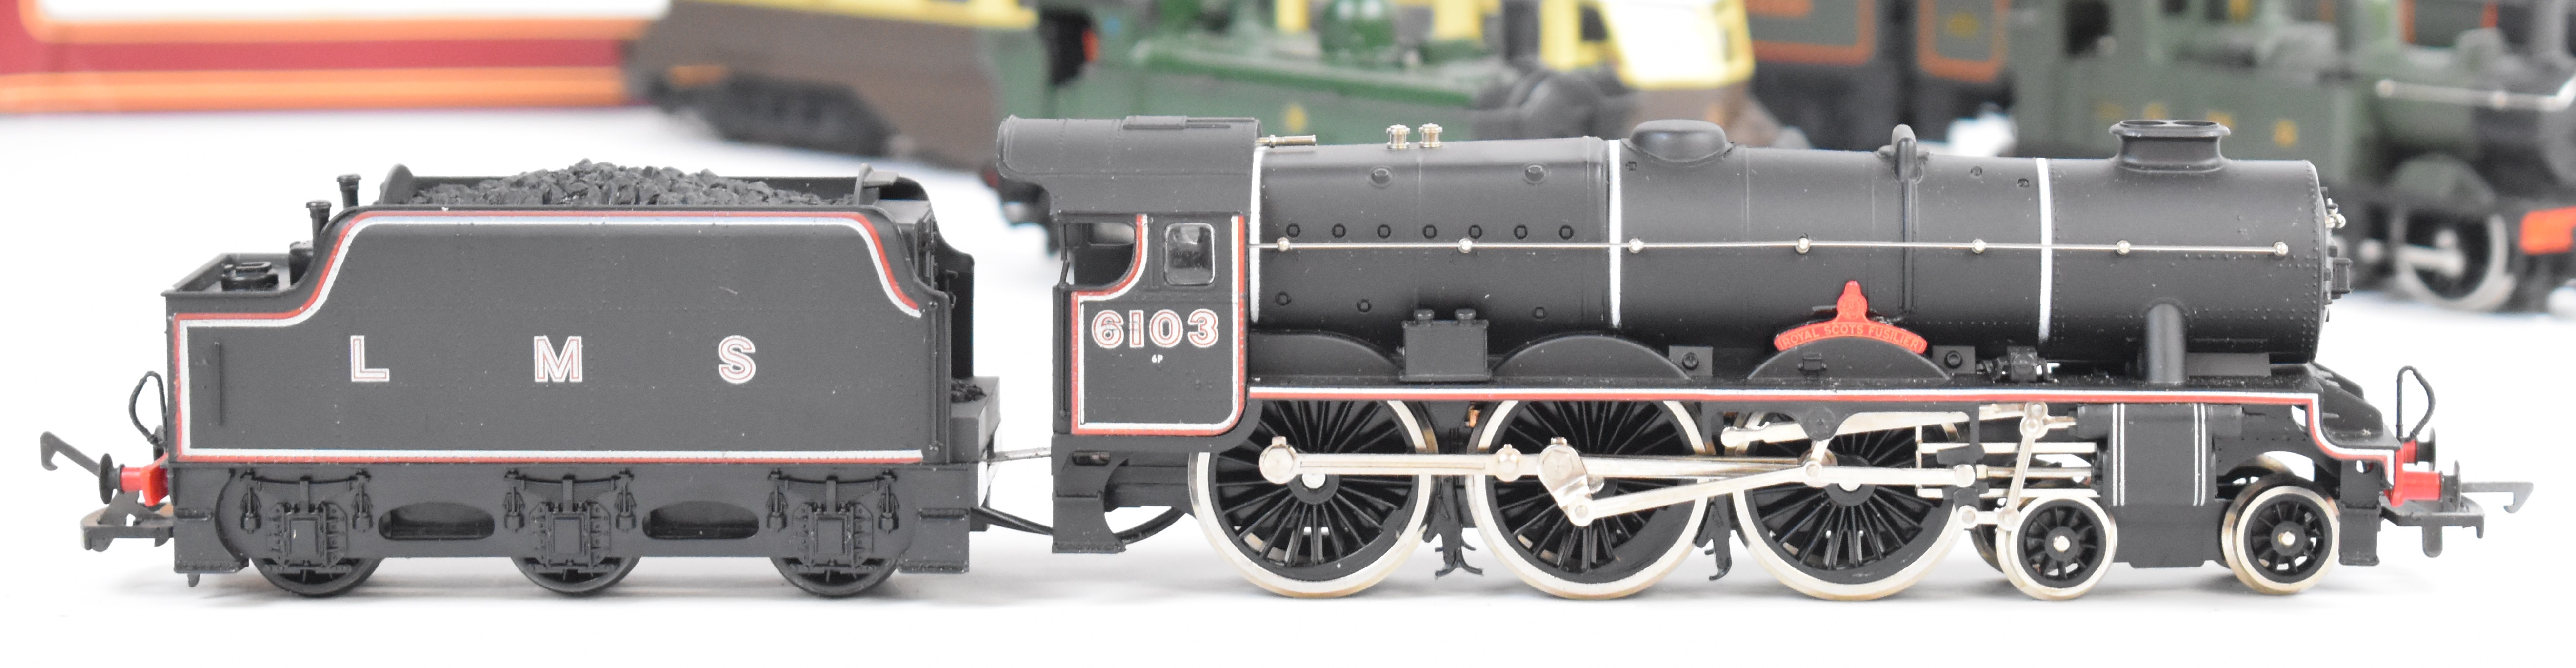 Five 00 gauge model railway locomotives by Airfix, Lima and similar to include GWR 0-4-2 1400 Tank - Image 2 of 7